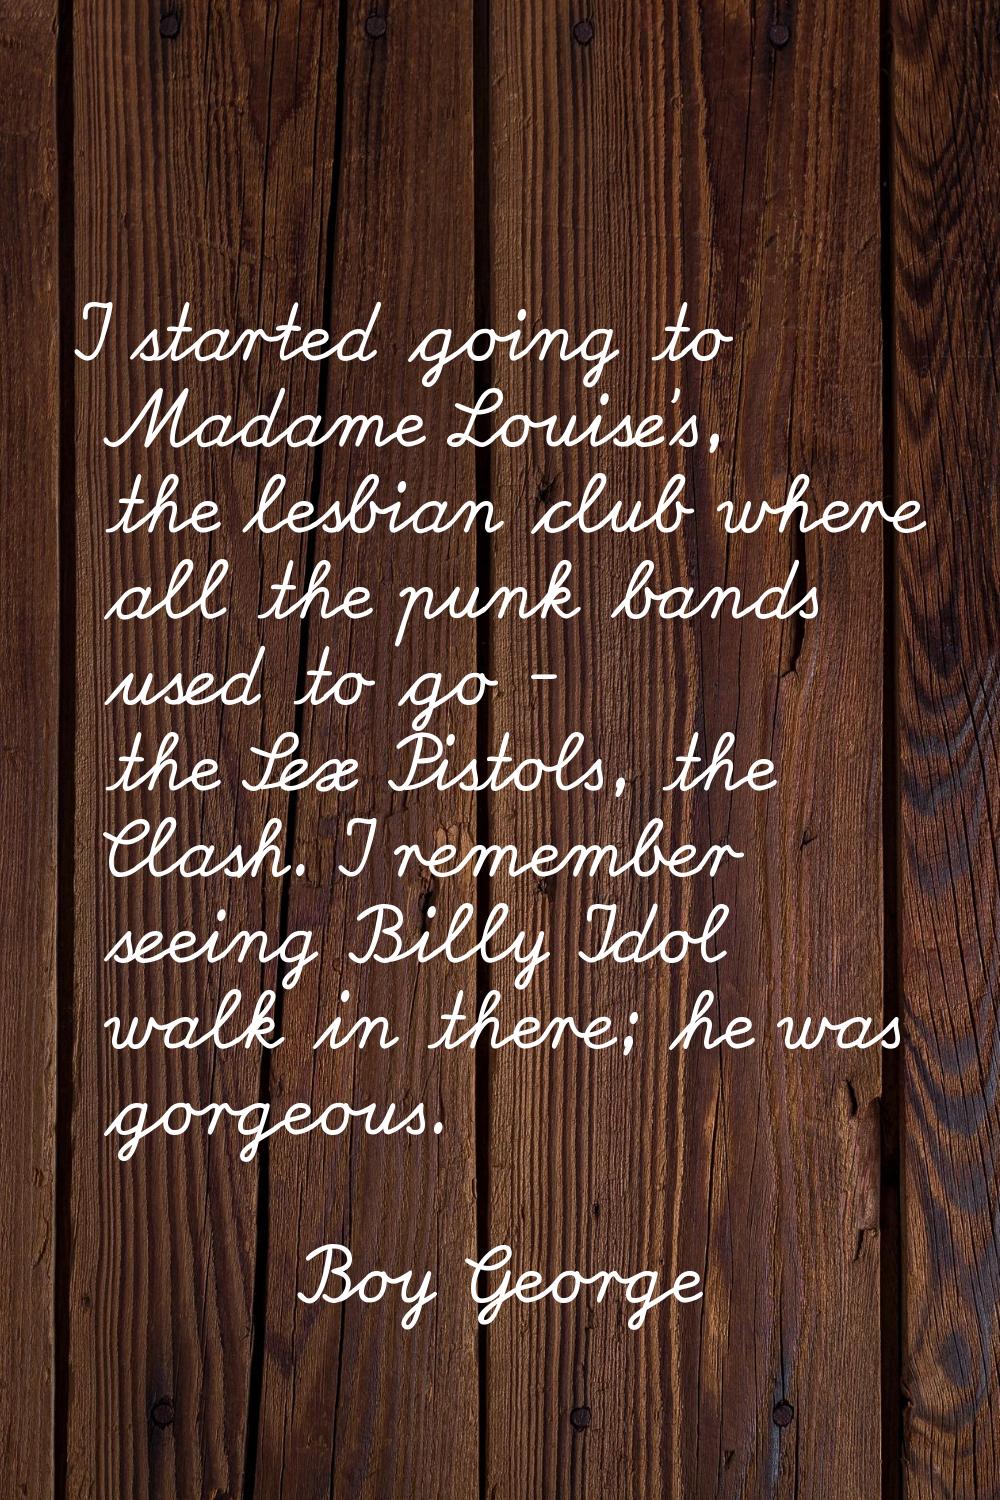 I started going to Madame Louise's, the lesbian club where all the punk bands used to go - the Sex 